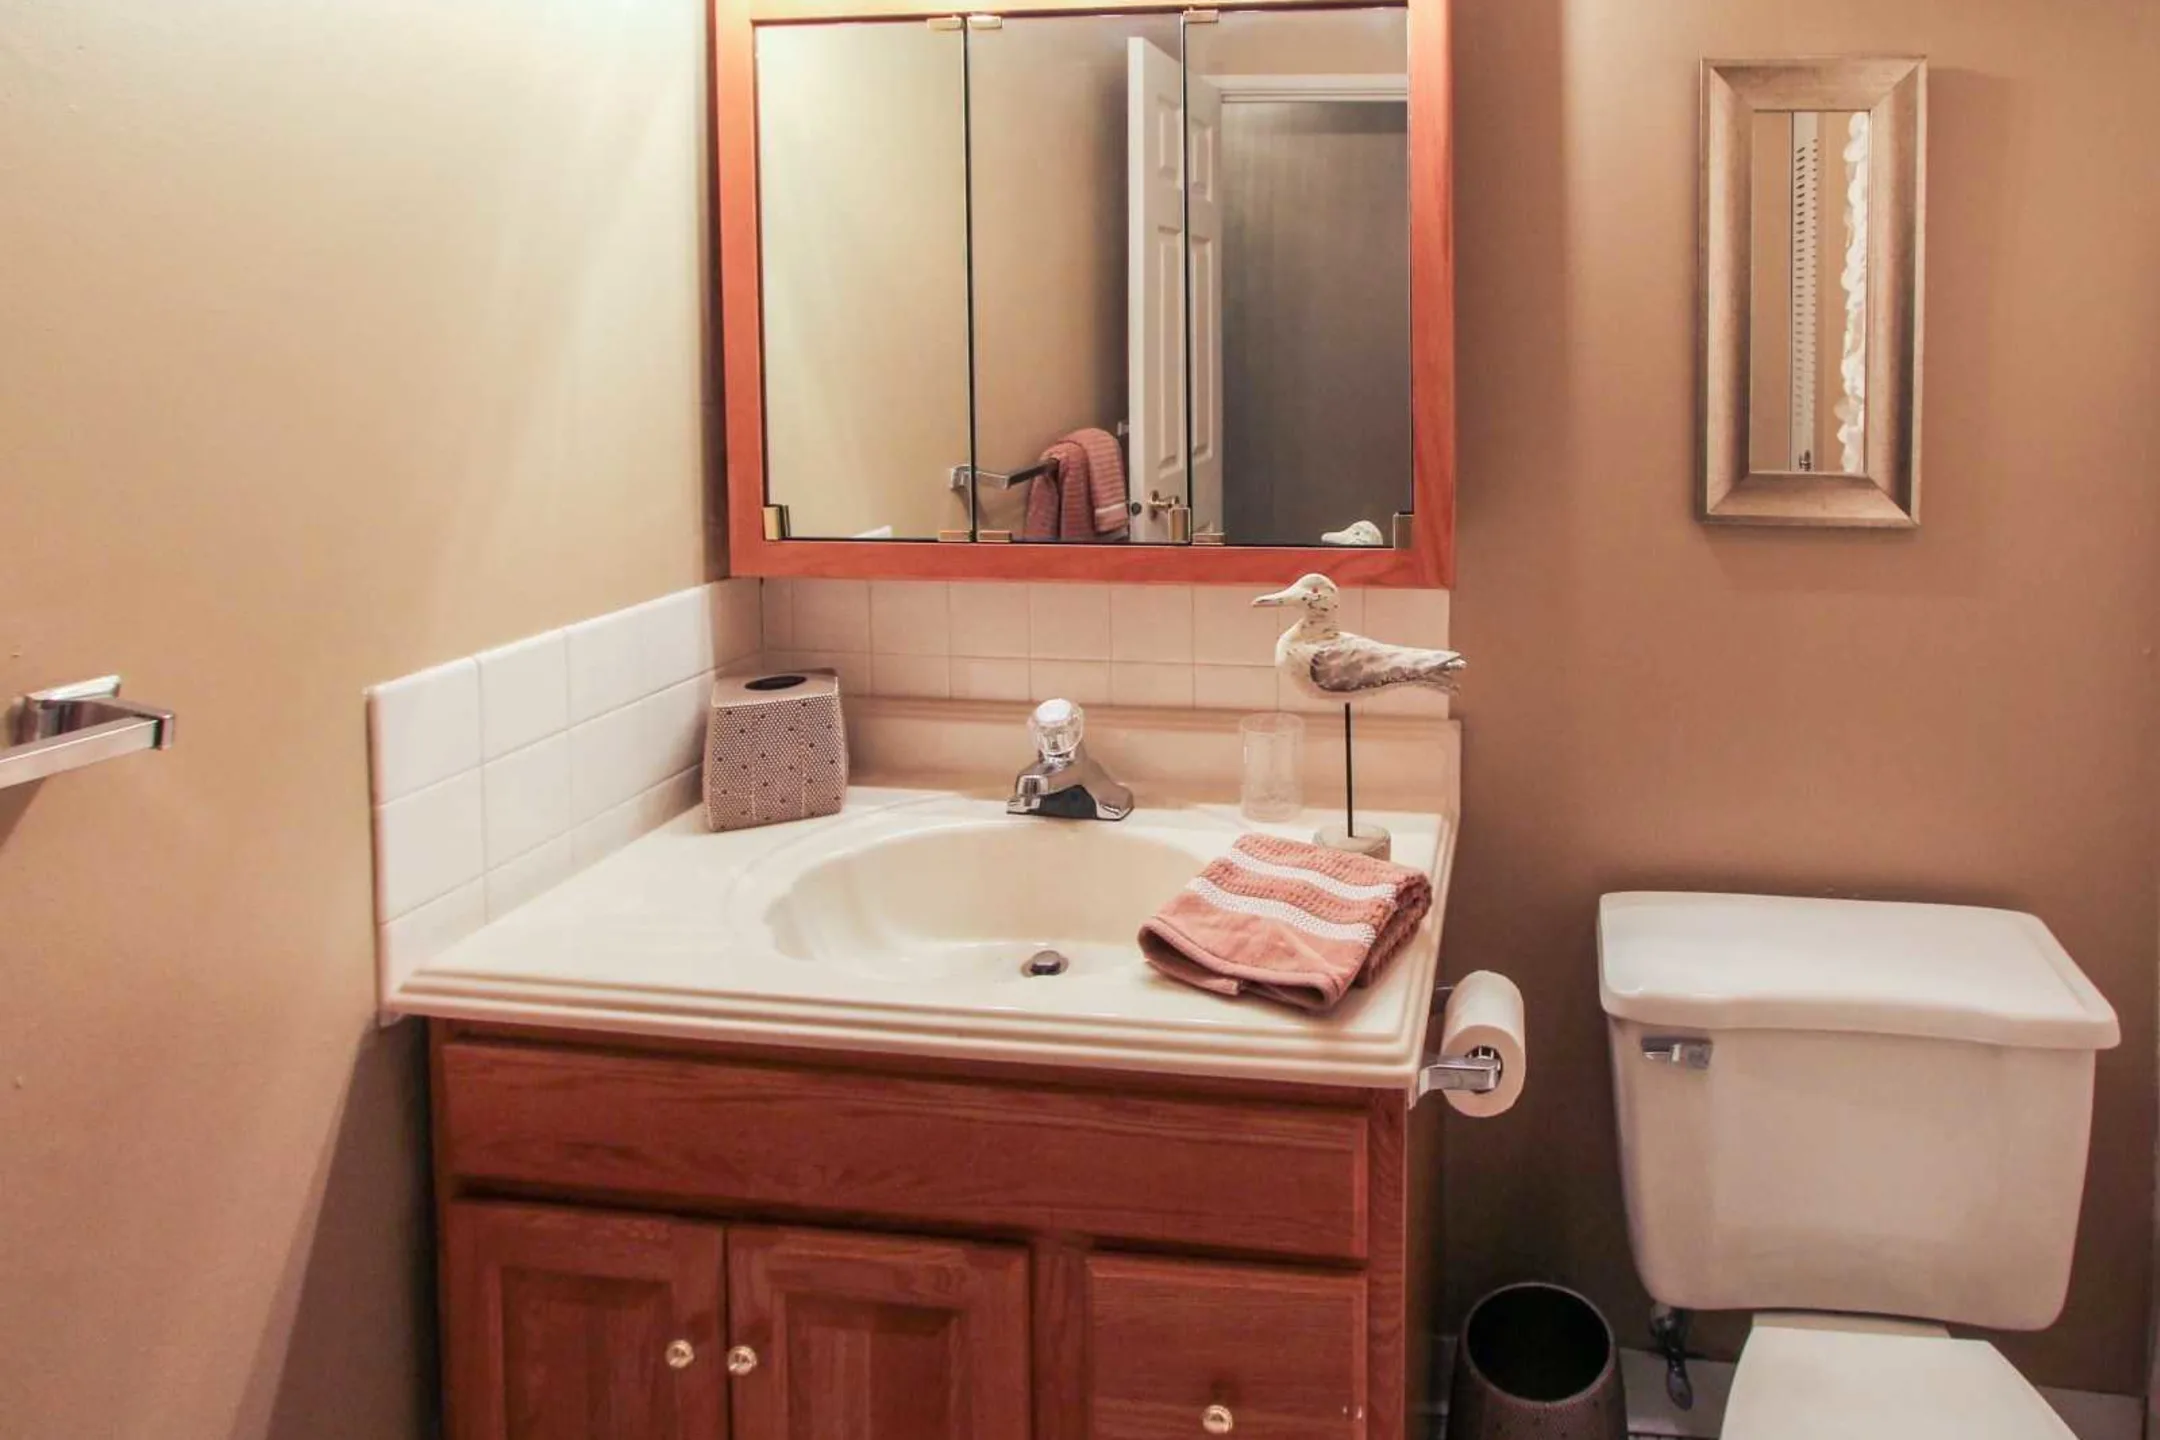 Bathroom - Hillbrook Apartments - Youngstown, OH